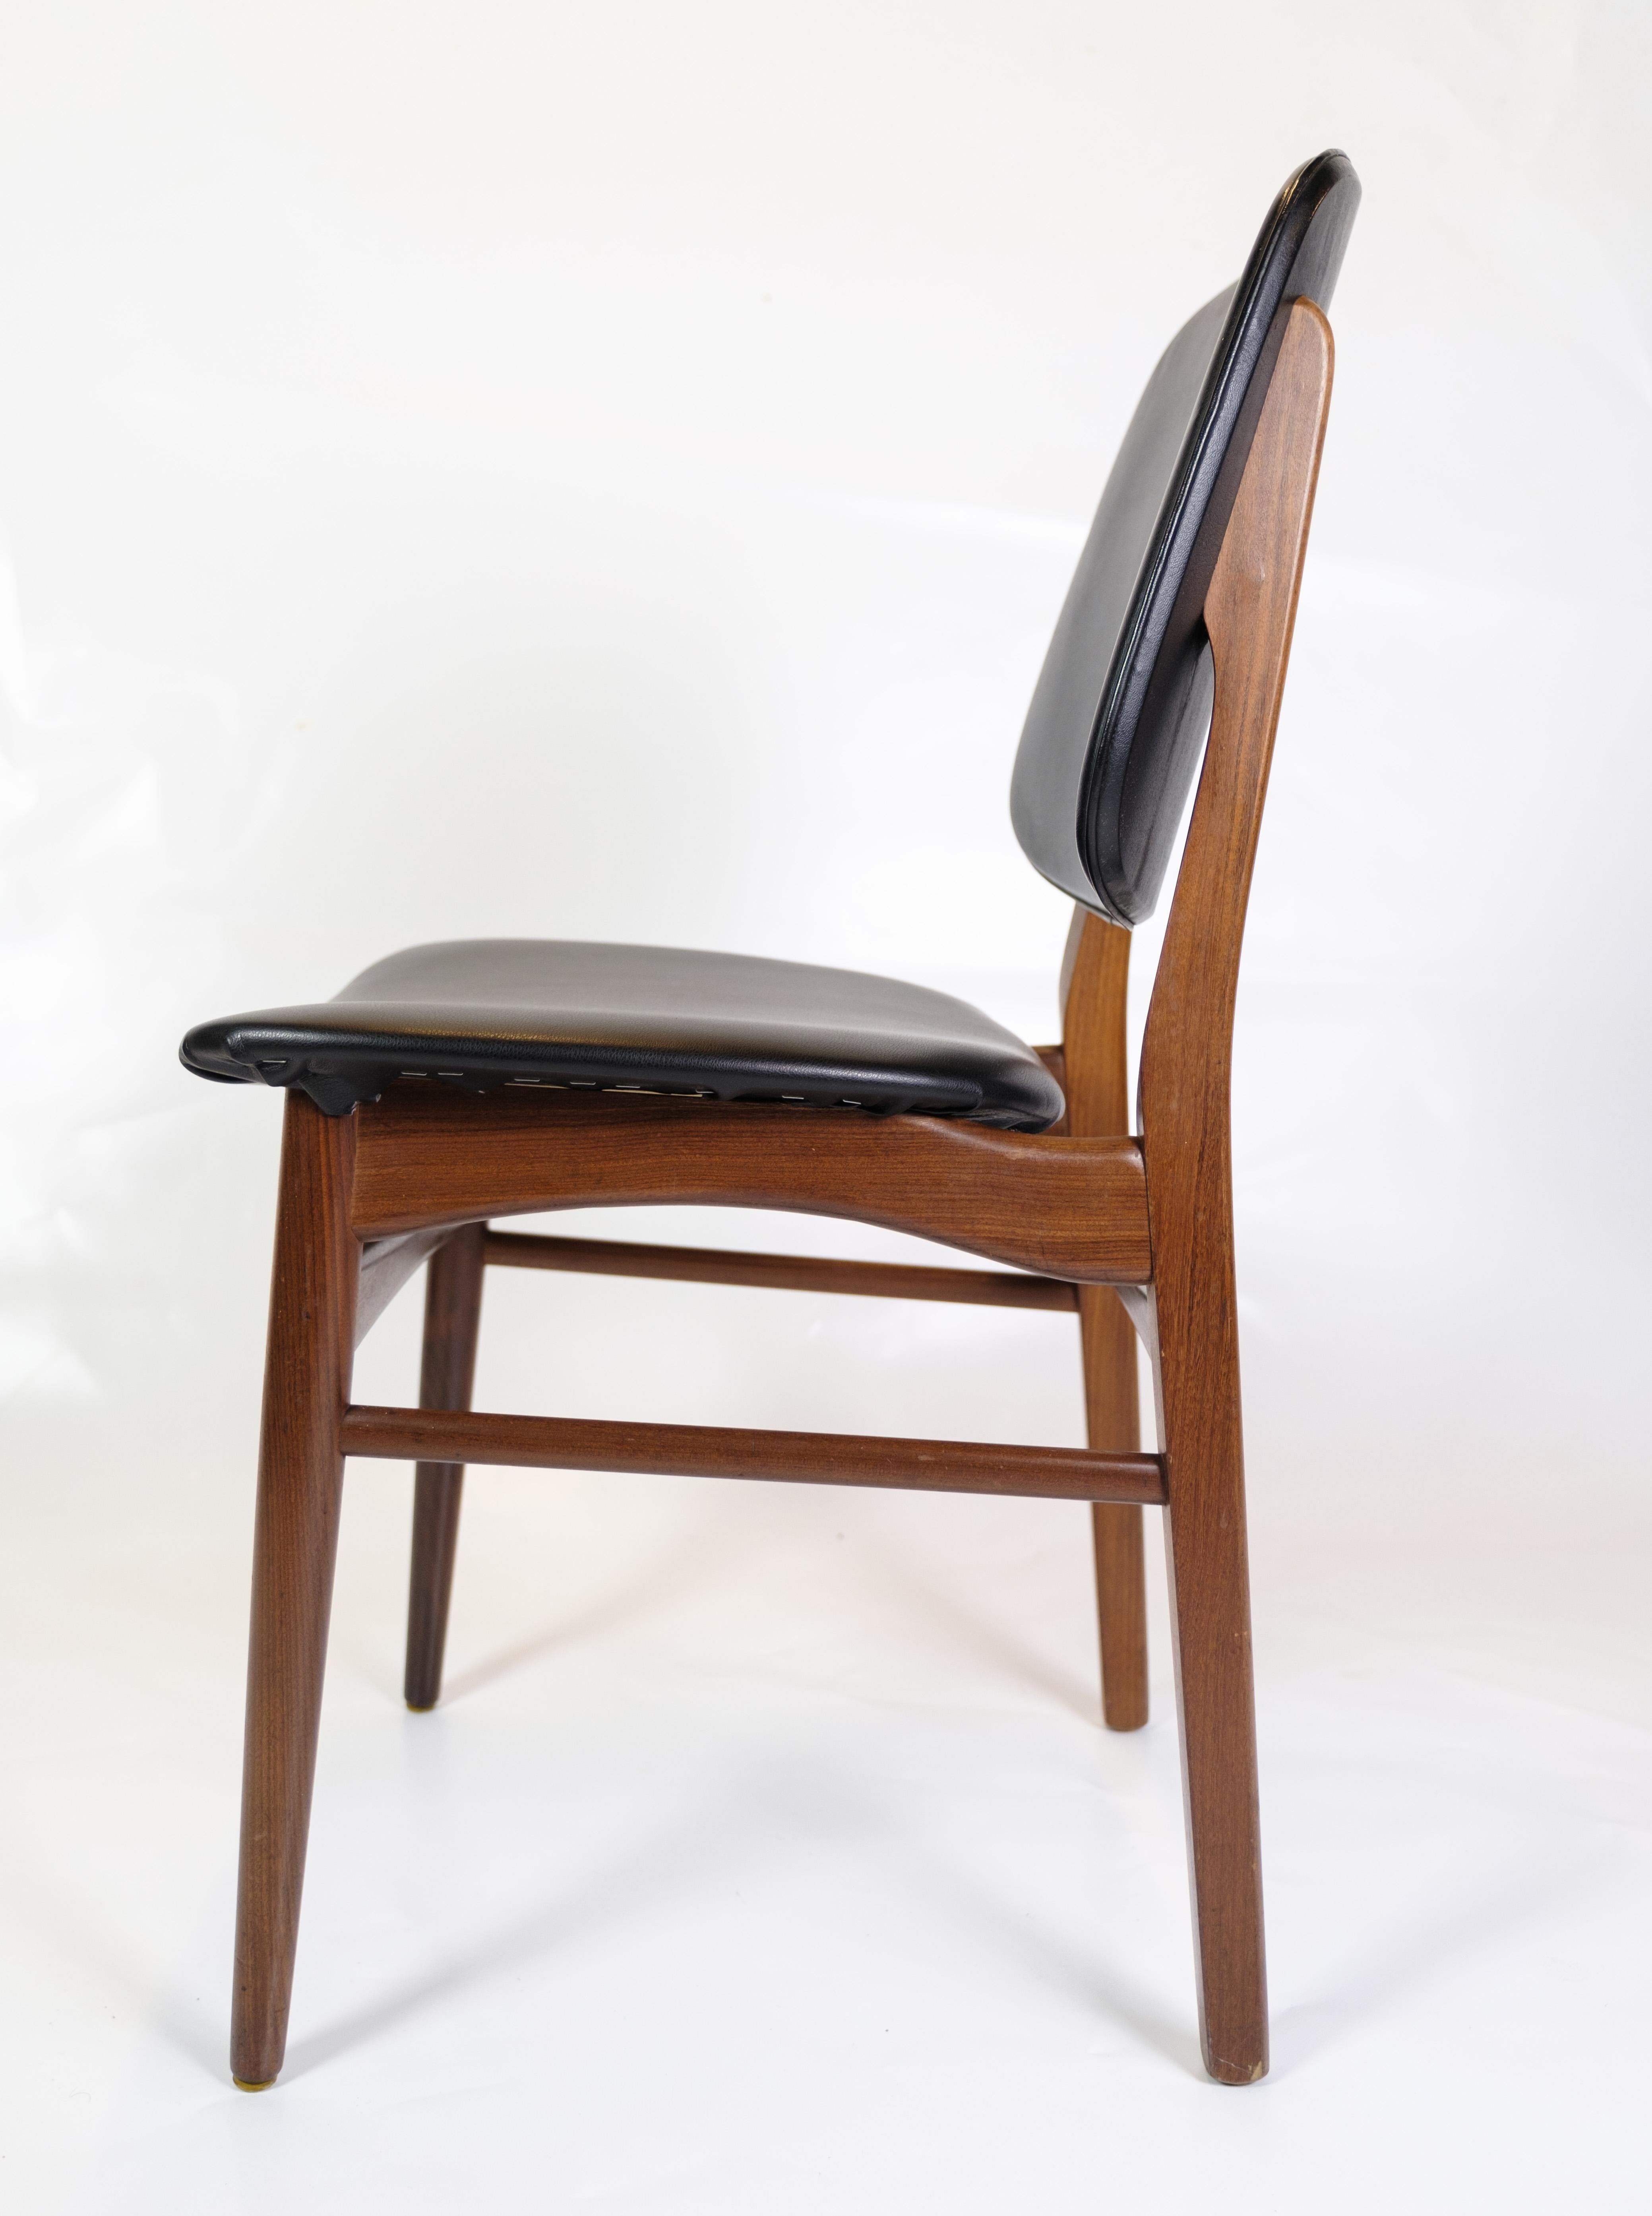  Set of six Teak Dining Chairs by Danish Master Craftsman from 1960s For Sale 2